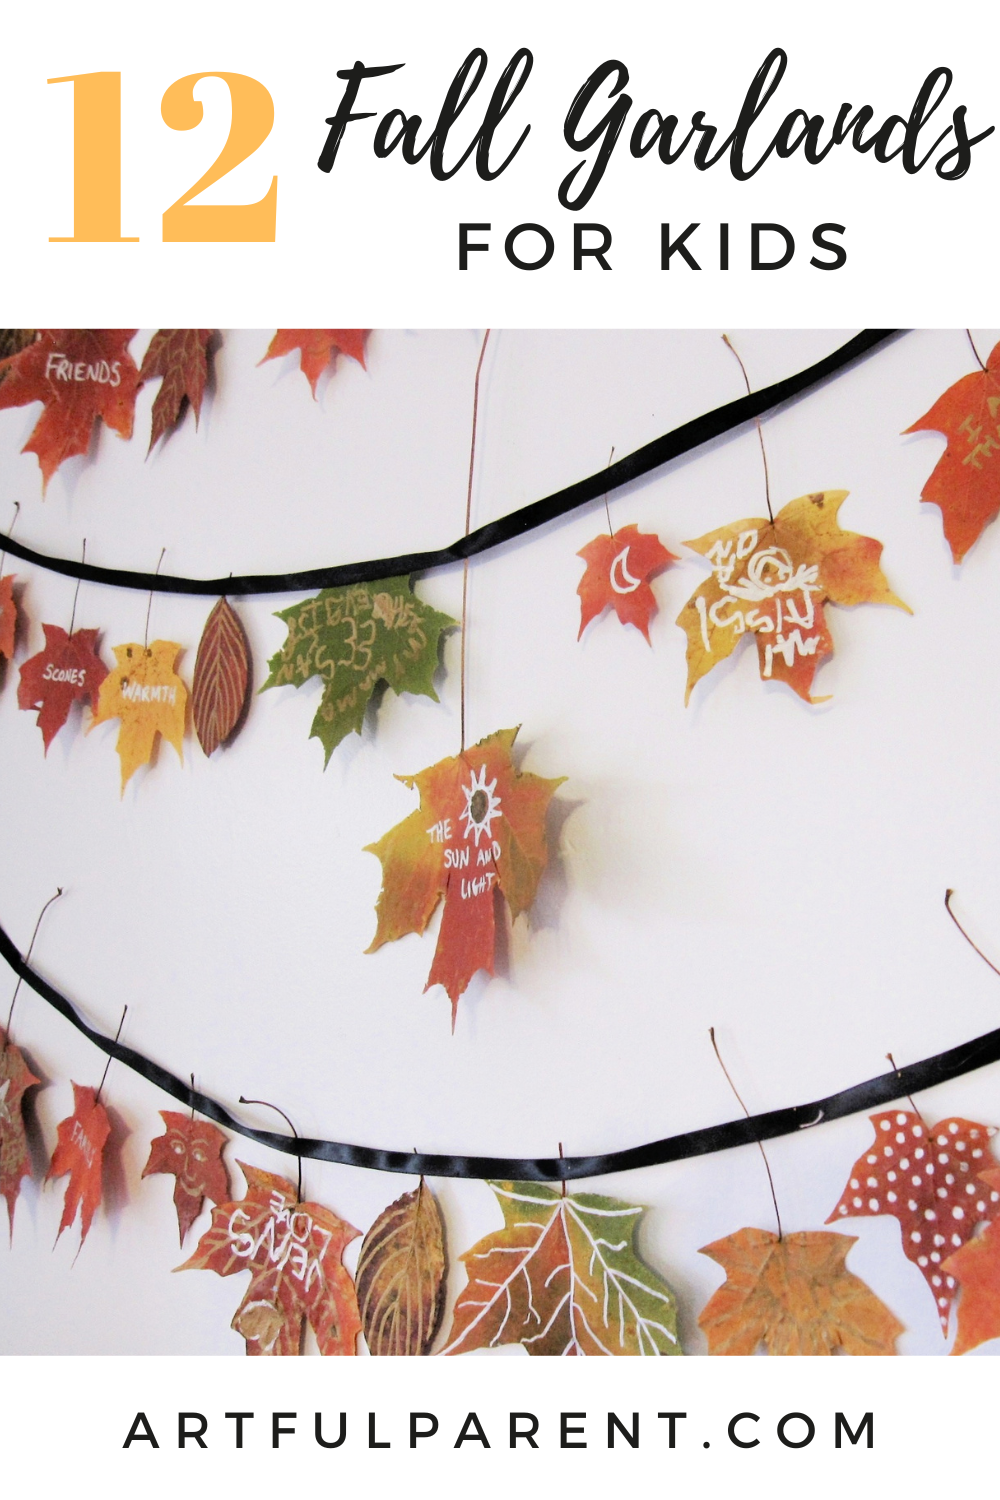 12 Easy Fall Garland Ideas for Kids